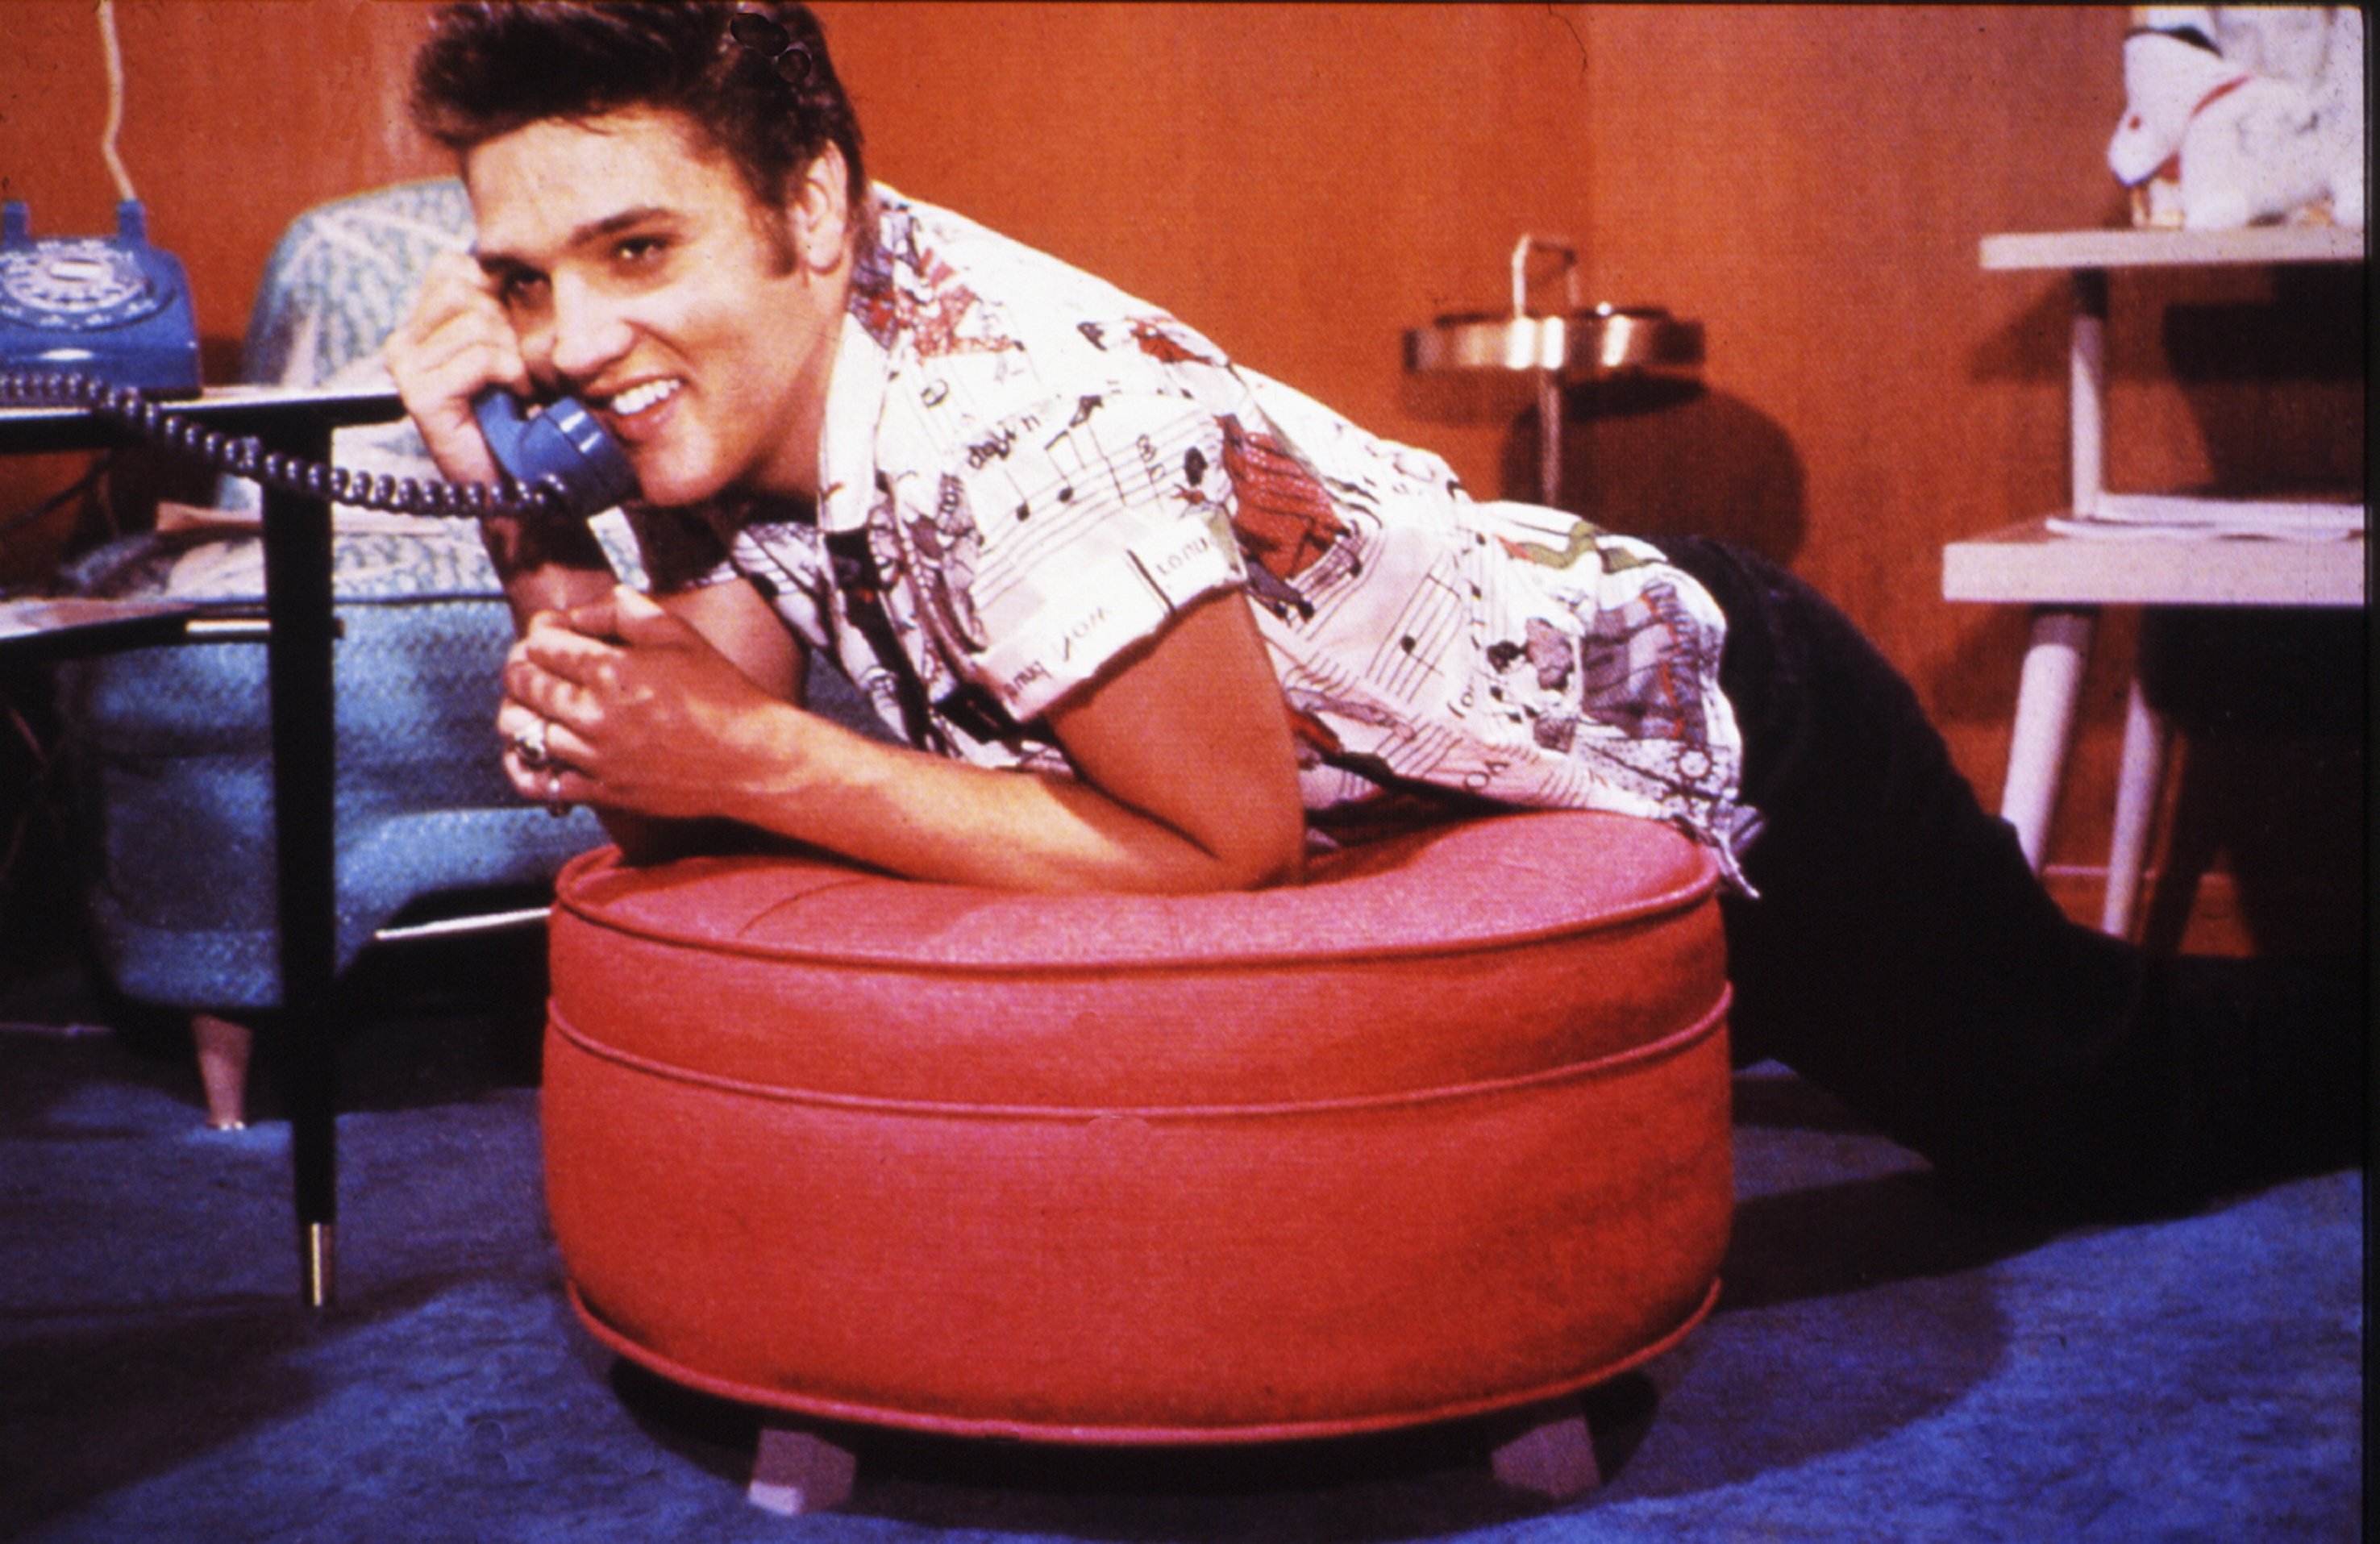 "Blue Suede Shoes" singer Elvis Presley holding a telephone while leaning on a futon